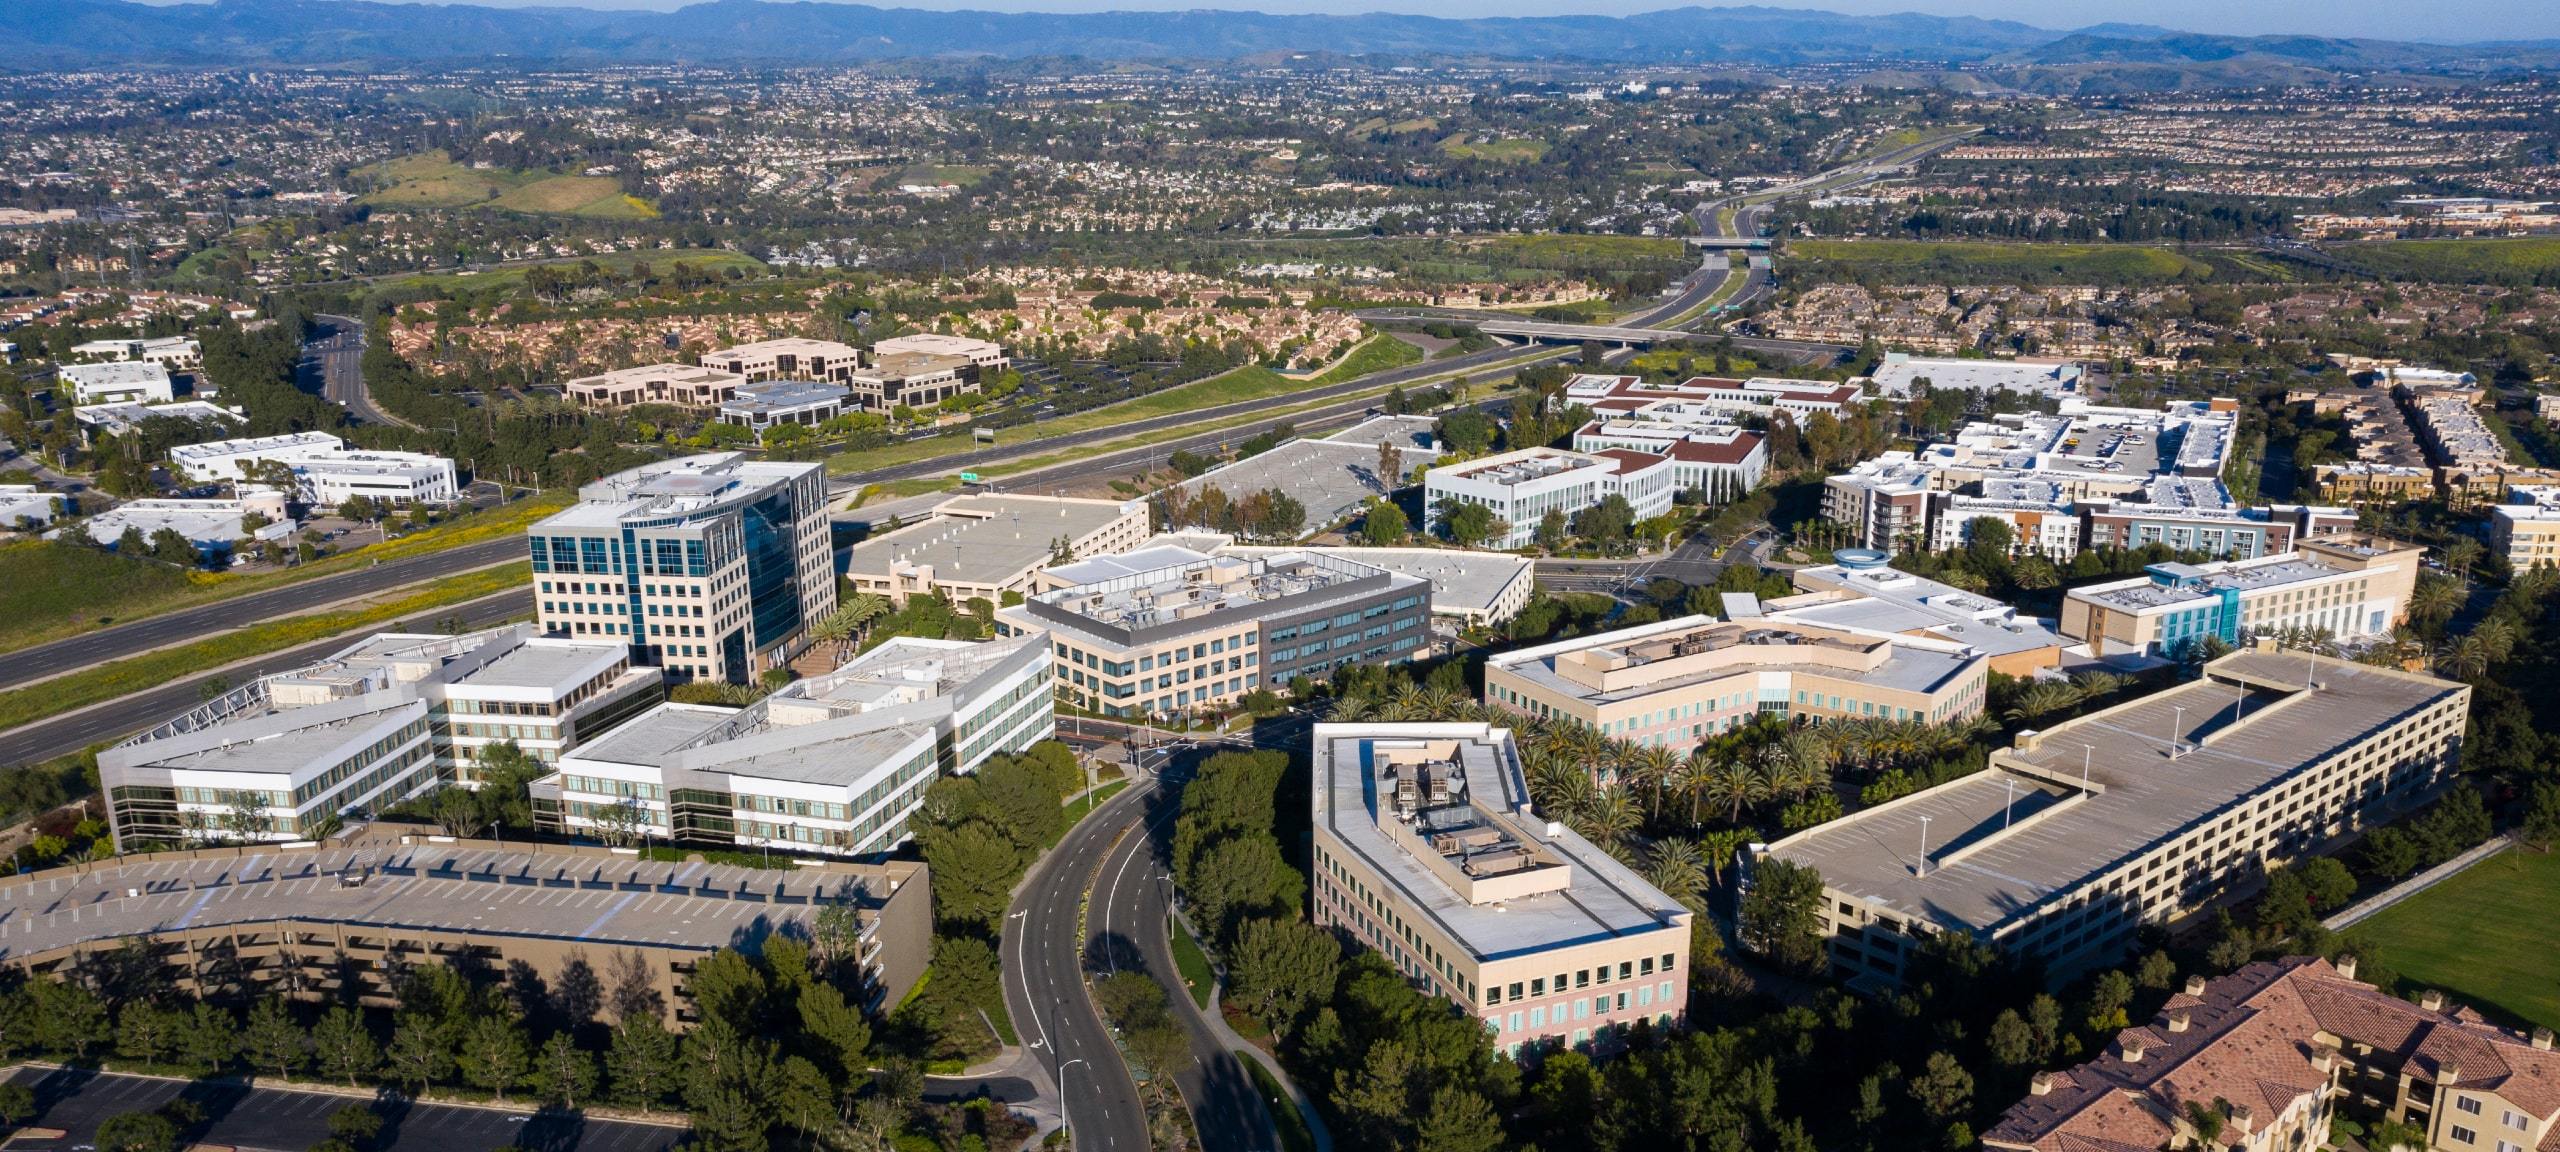 Aerial view of Aliso Viejo, CA business district